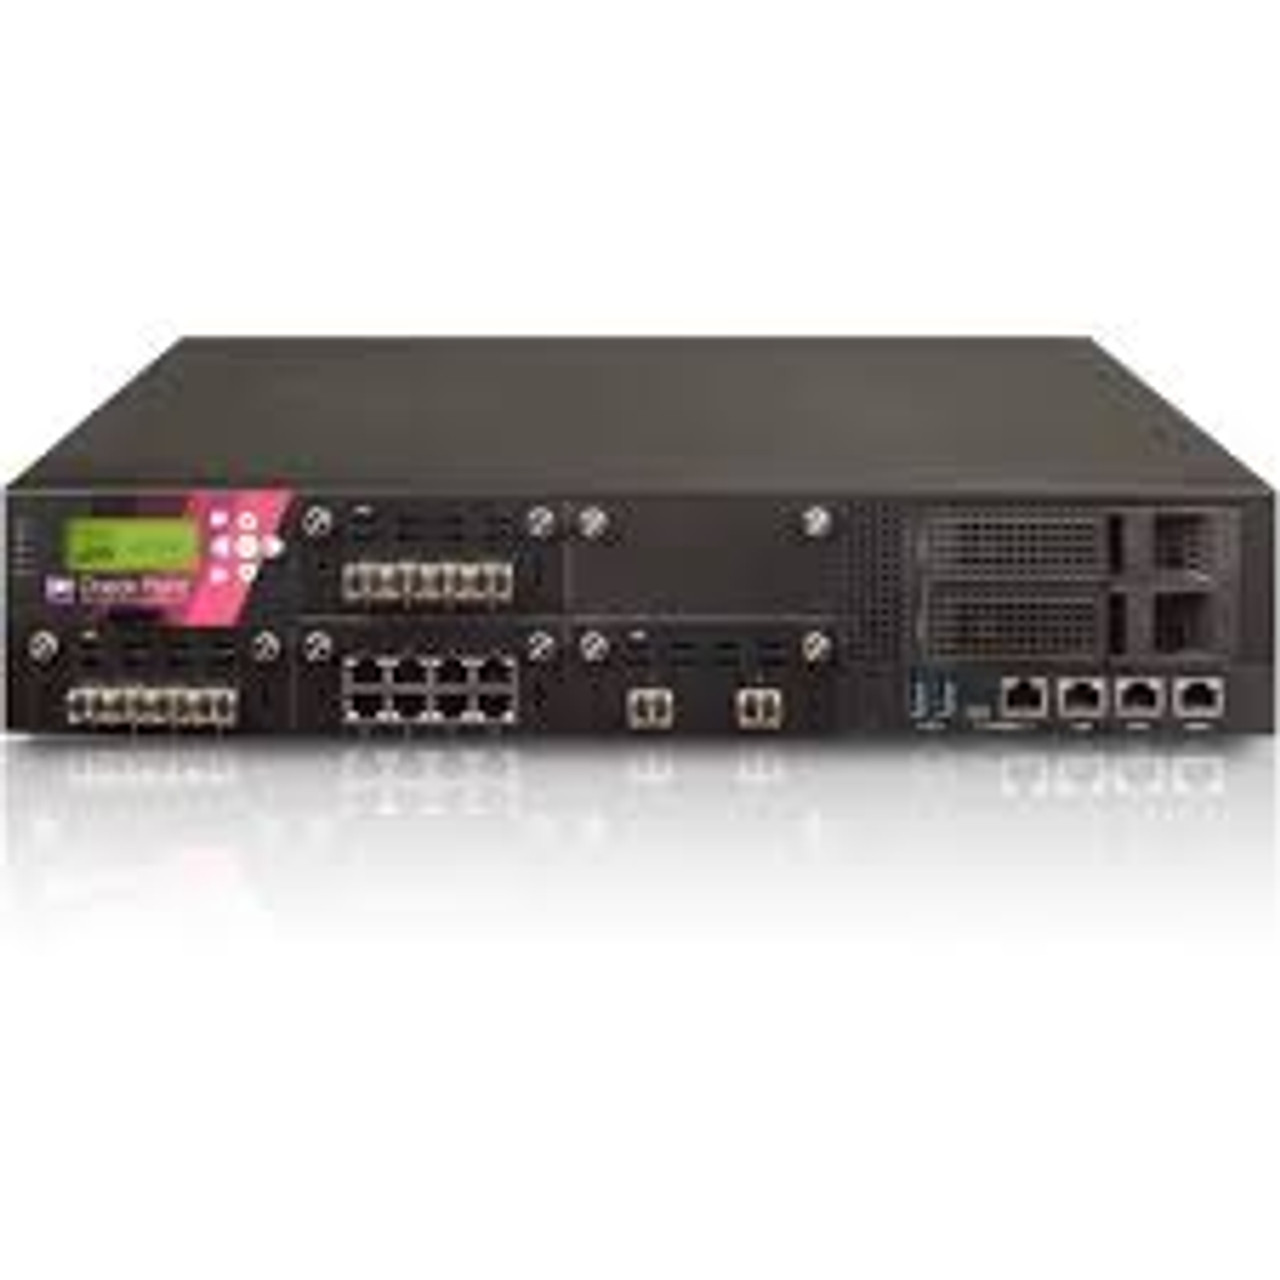 23500 Next Generation Threat Prevention Appliance - High Performance Package (HPP)